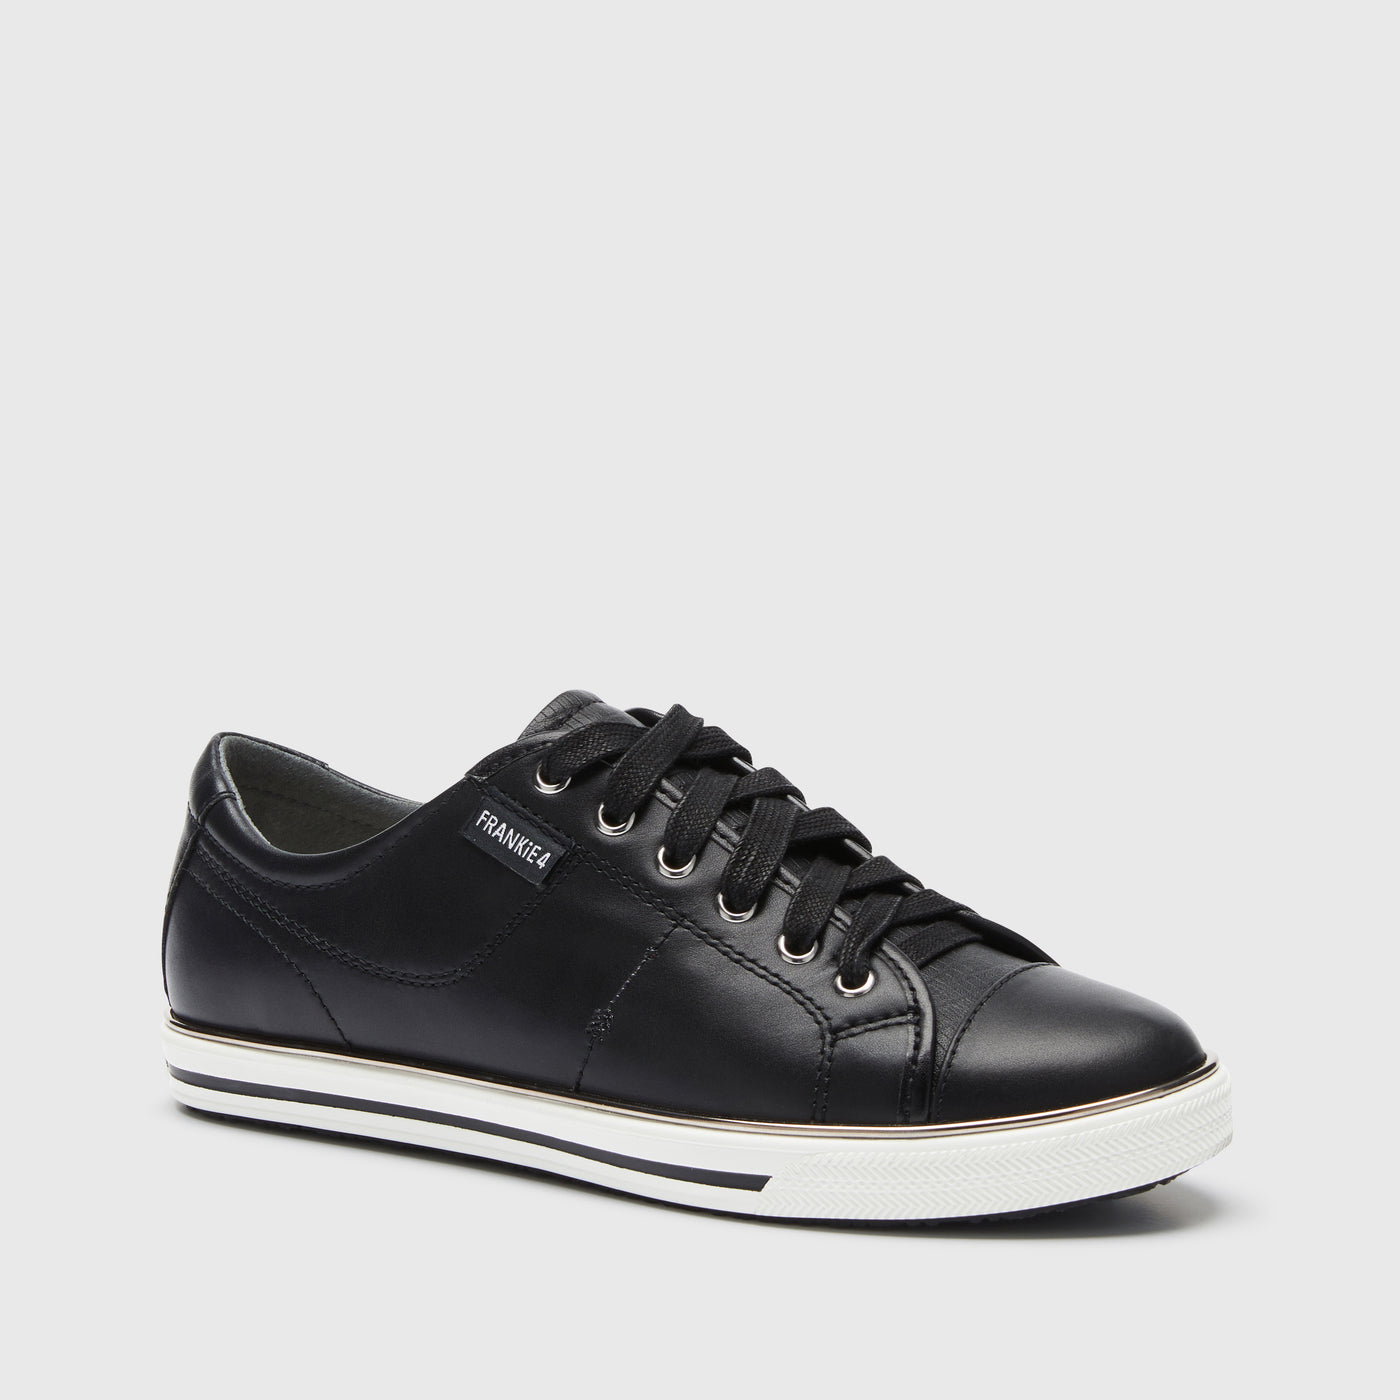 black leather sneaker with white sole black lace